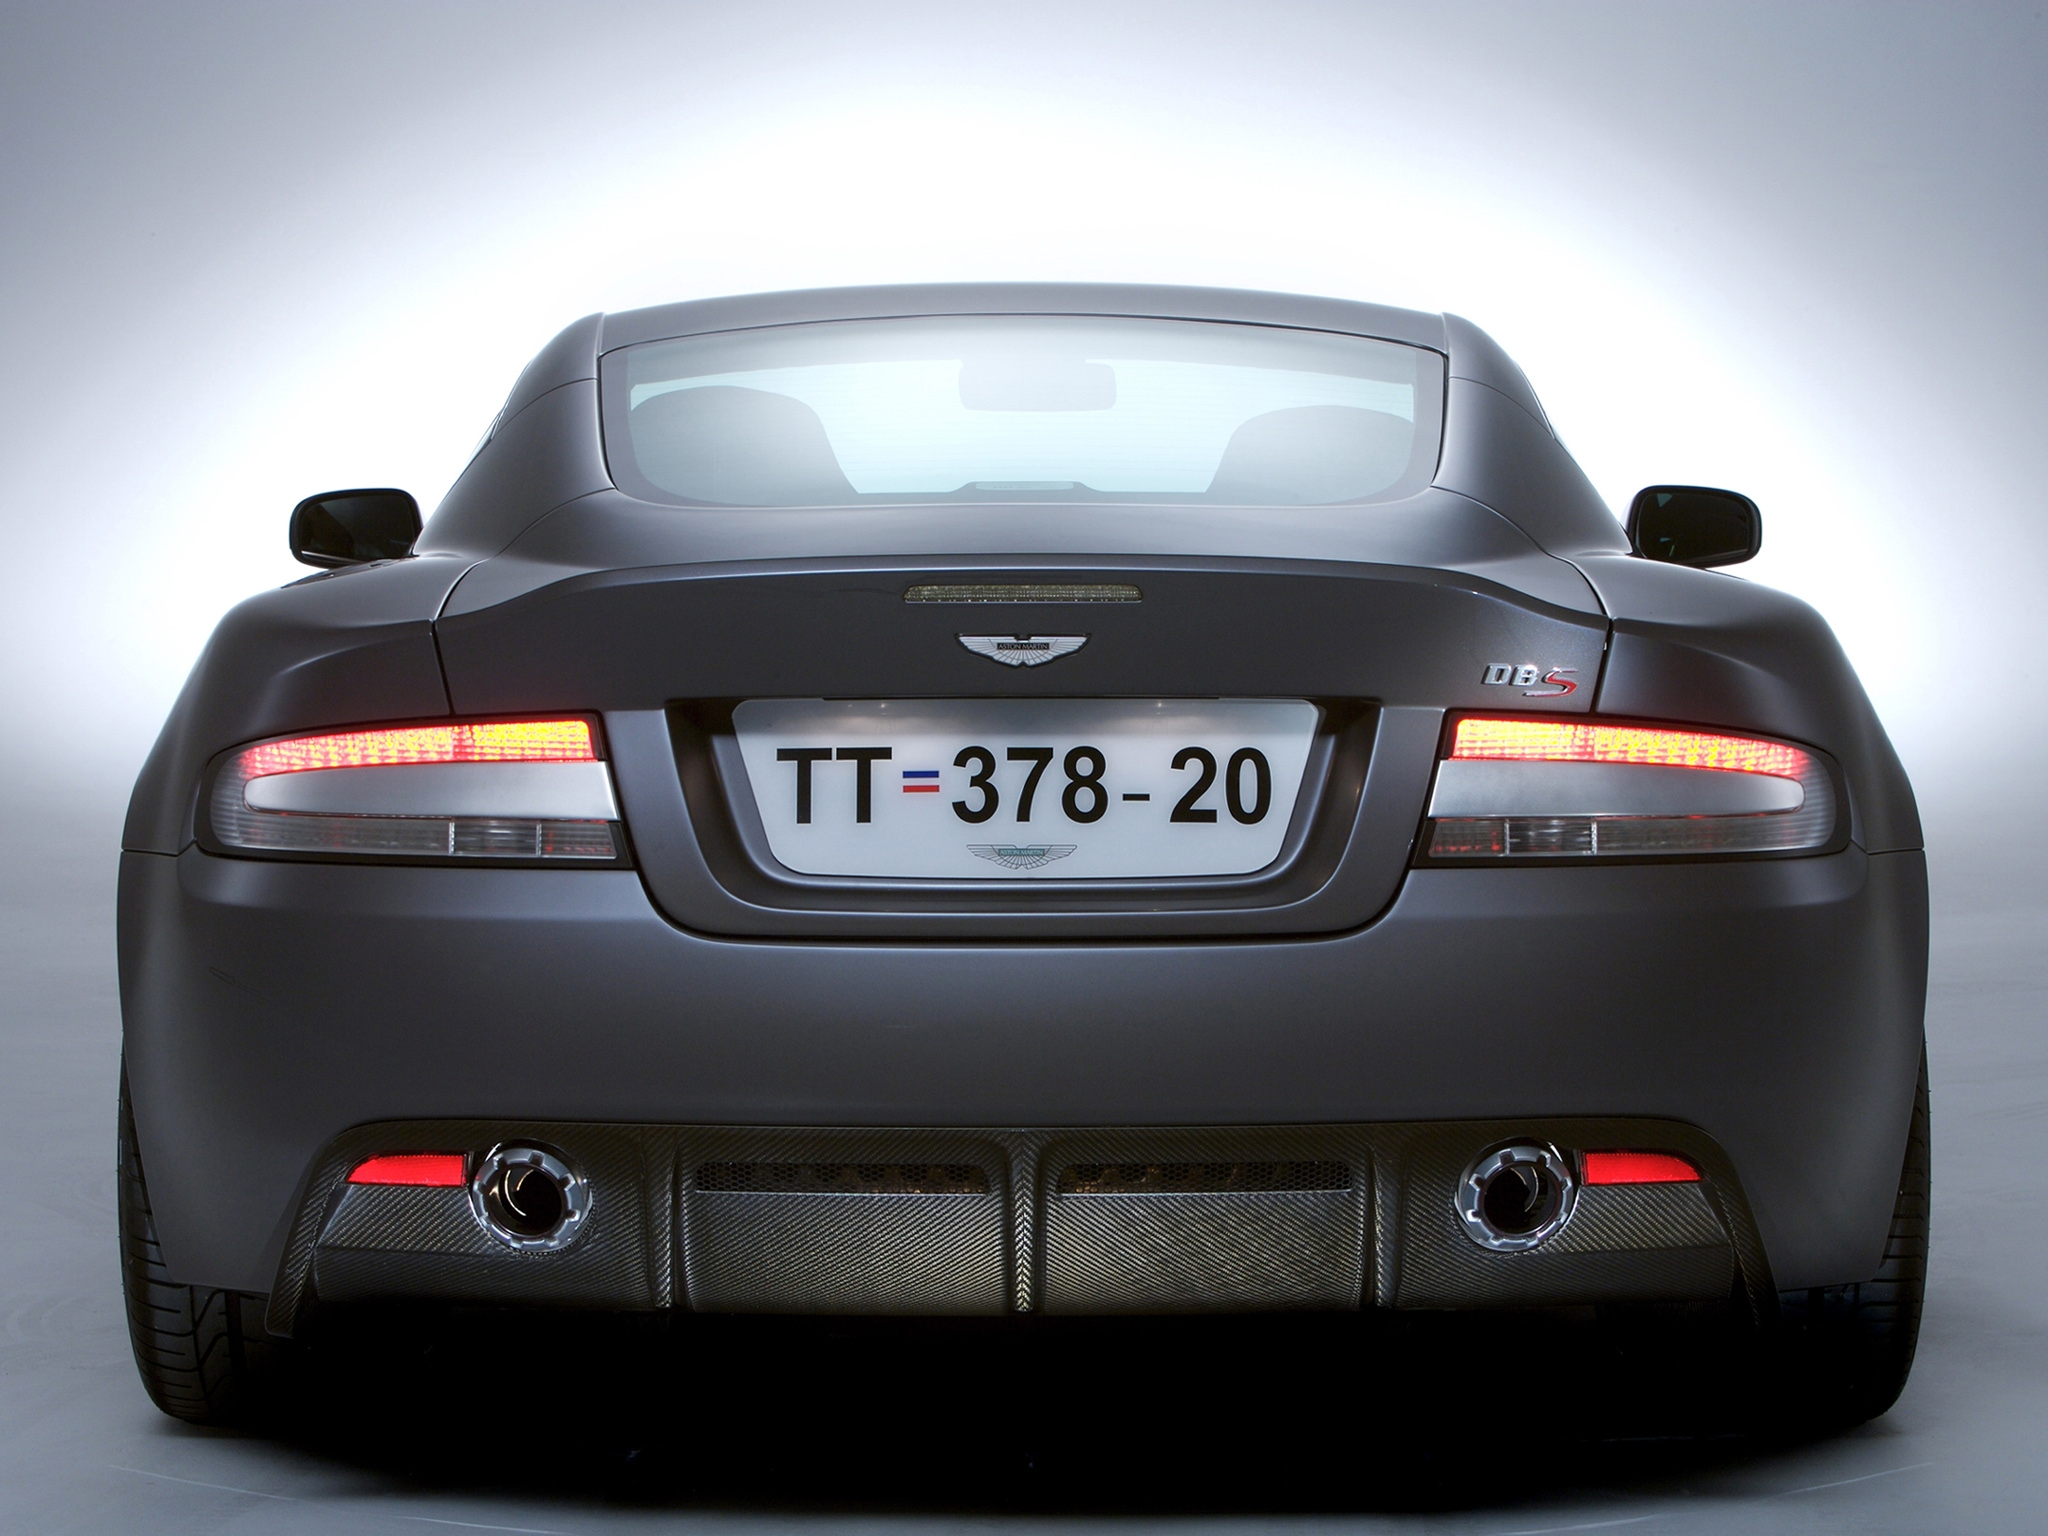 cars, dbs, auto, aston martin, grey, back view, rear view, style, 2006